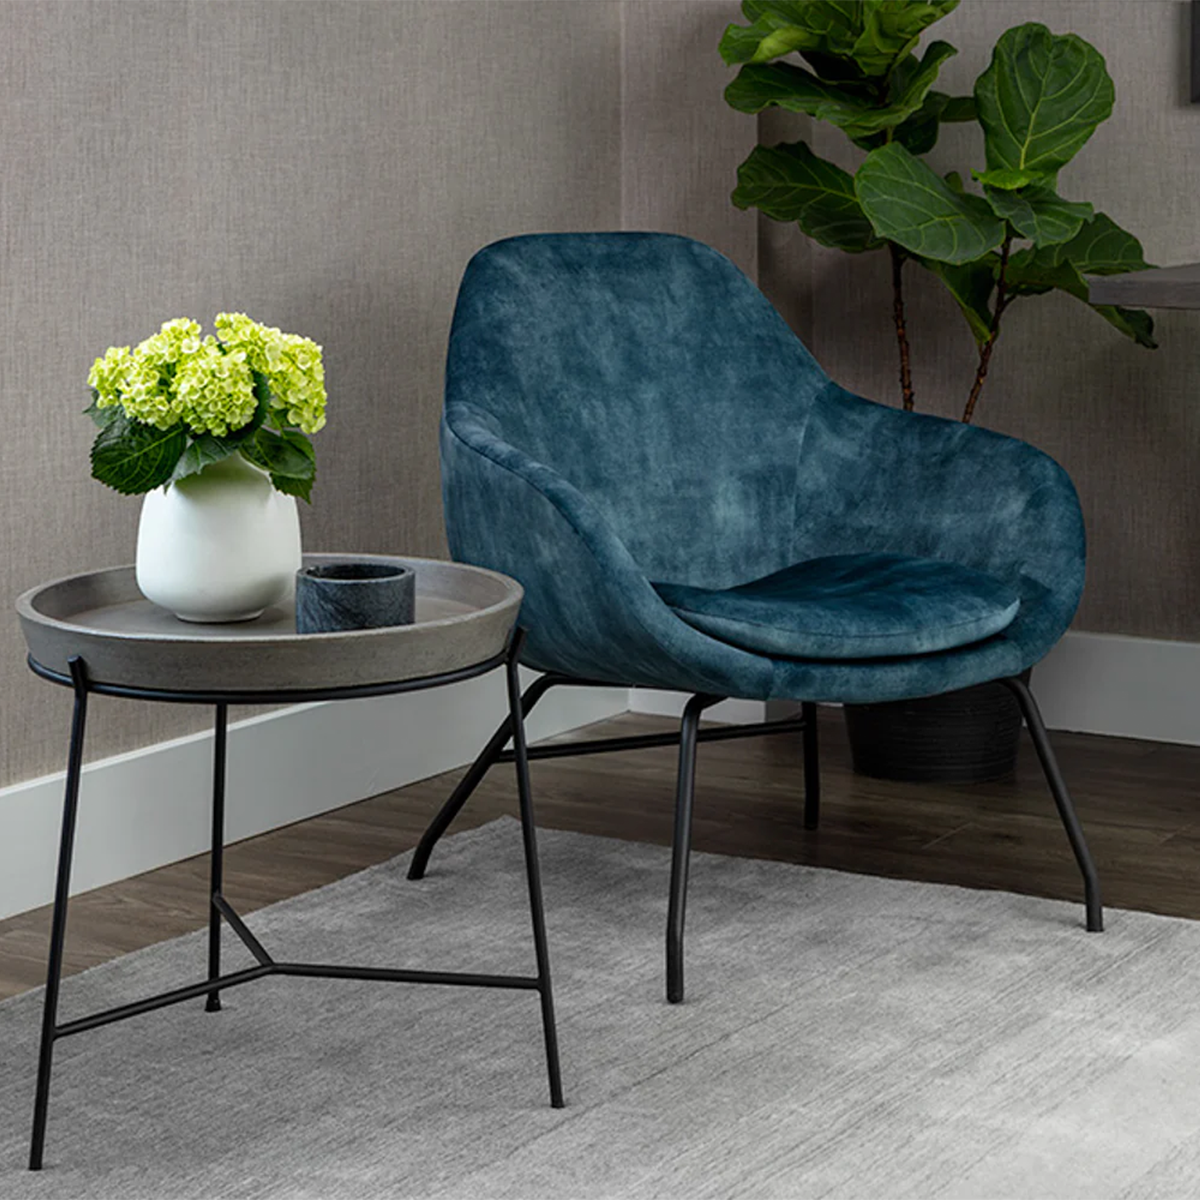 Remy End Table by Sunpan in a Livingroom